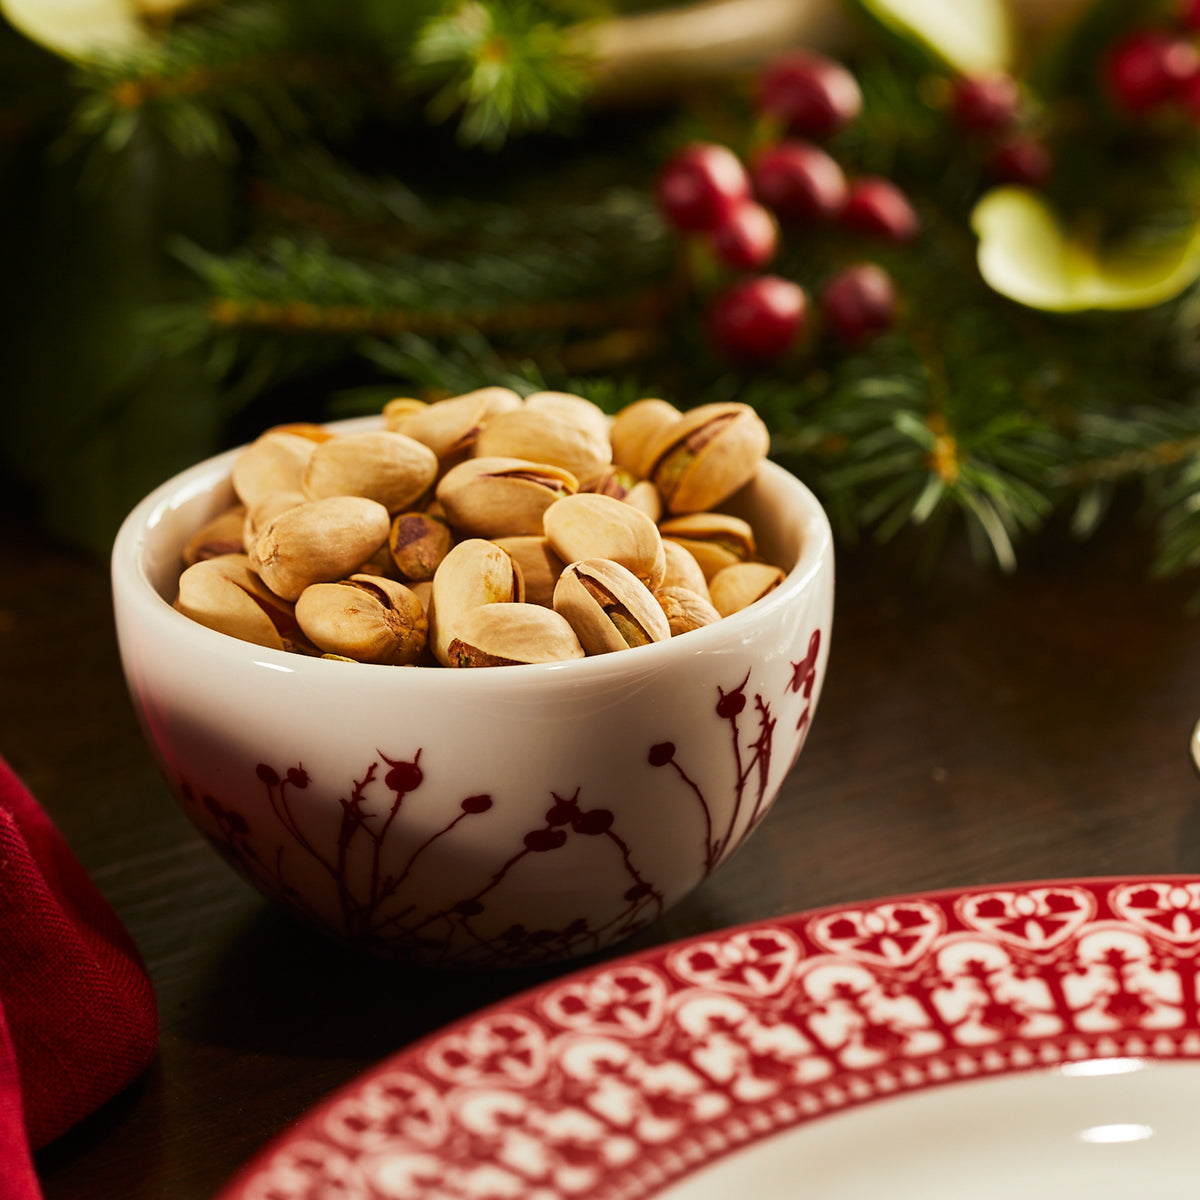 A Winterberries Snack Bowl of pistachios and a plate sit on the table. (Brand Name: Caskata Artisanal Home)